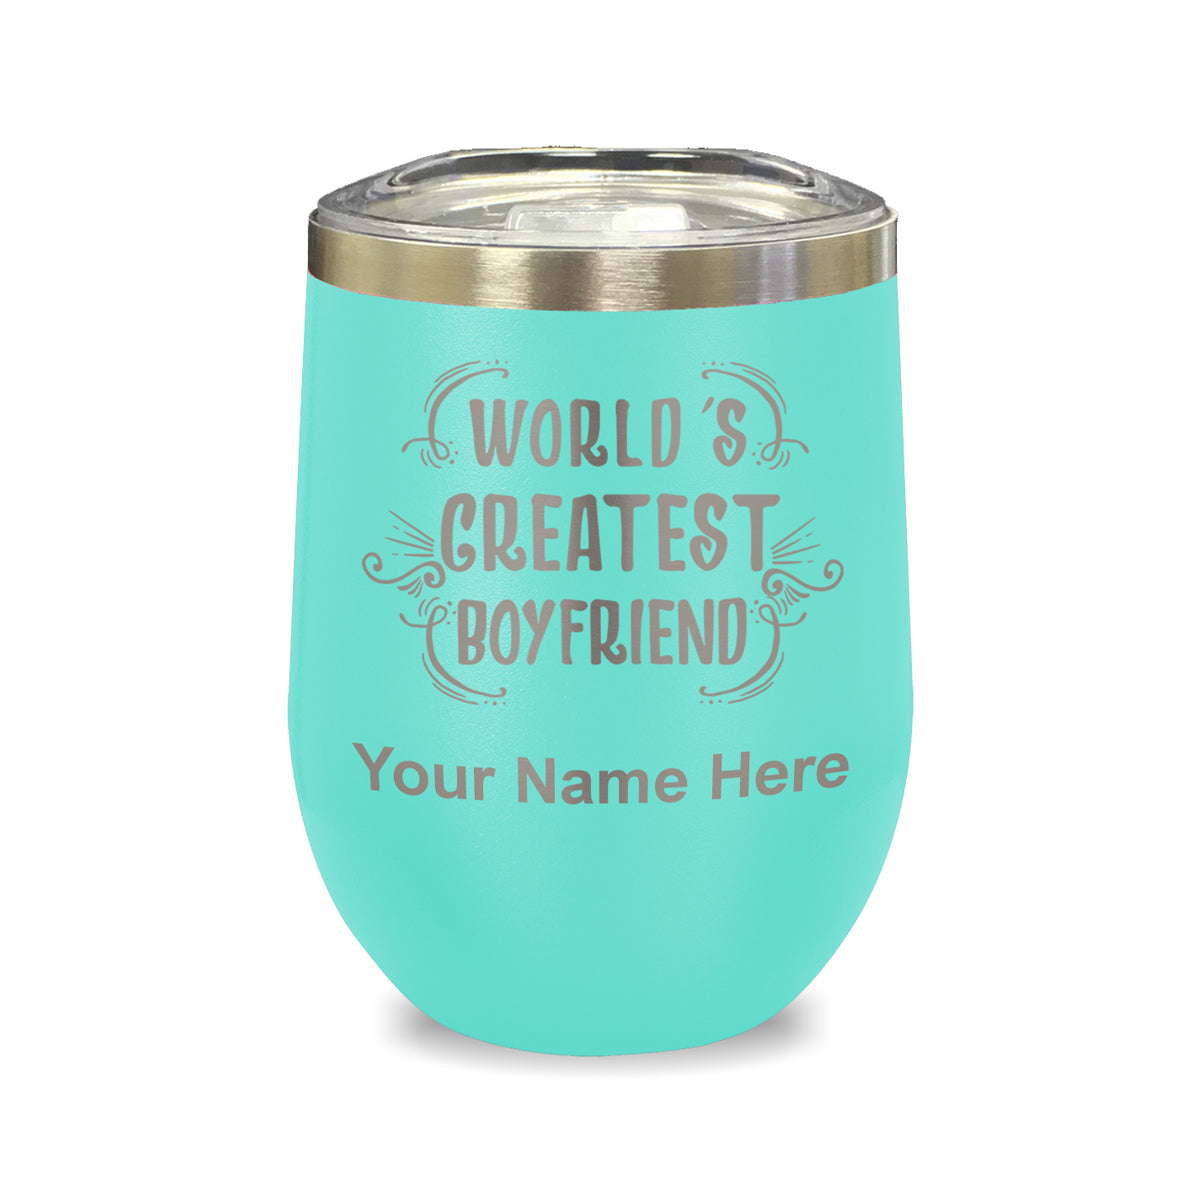 LaserGram Double Wall Stainless Steel Wine Glass, World's Greatest Boyfriend, Personalized Engraving Included